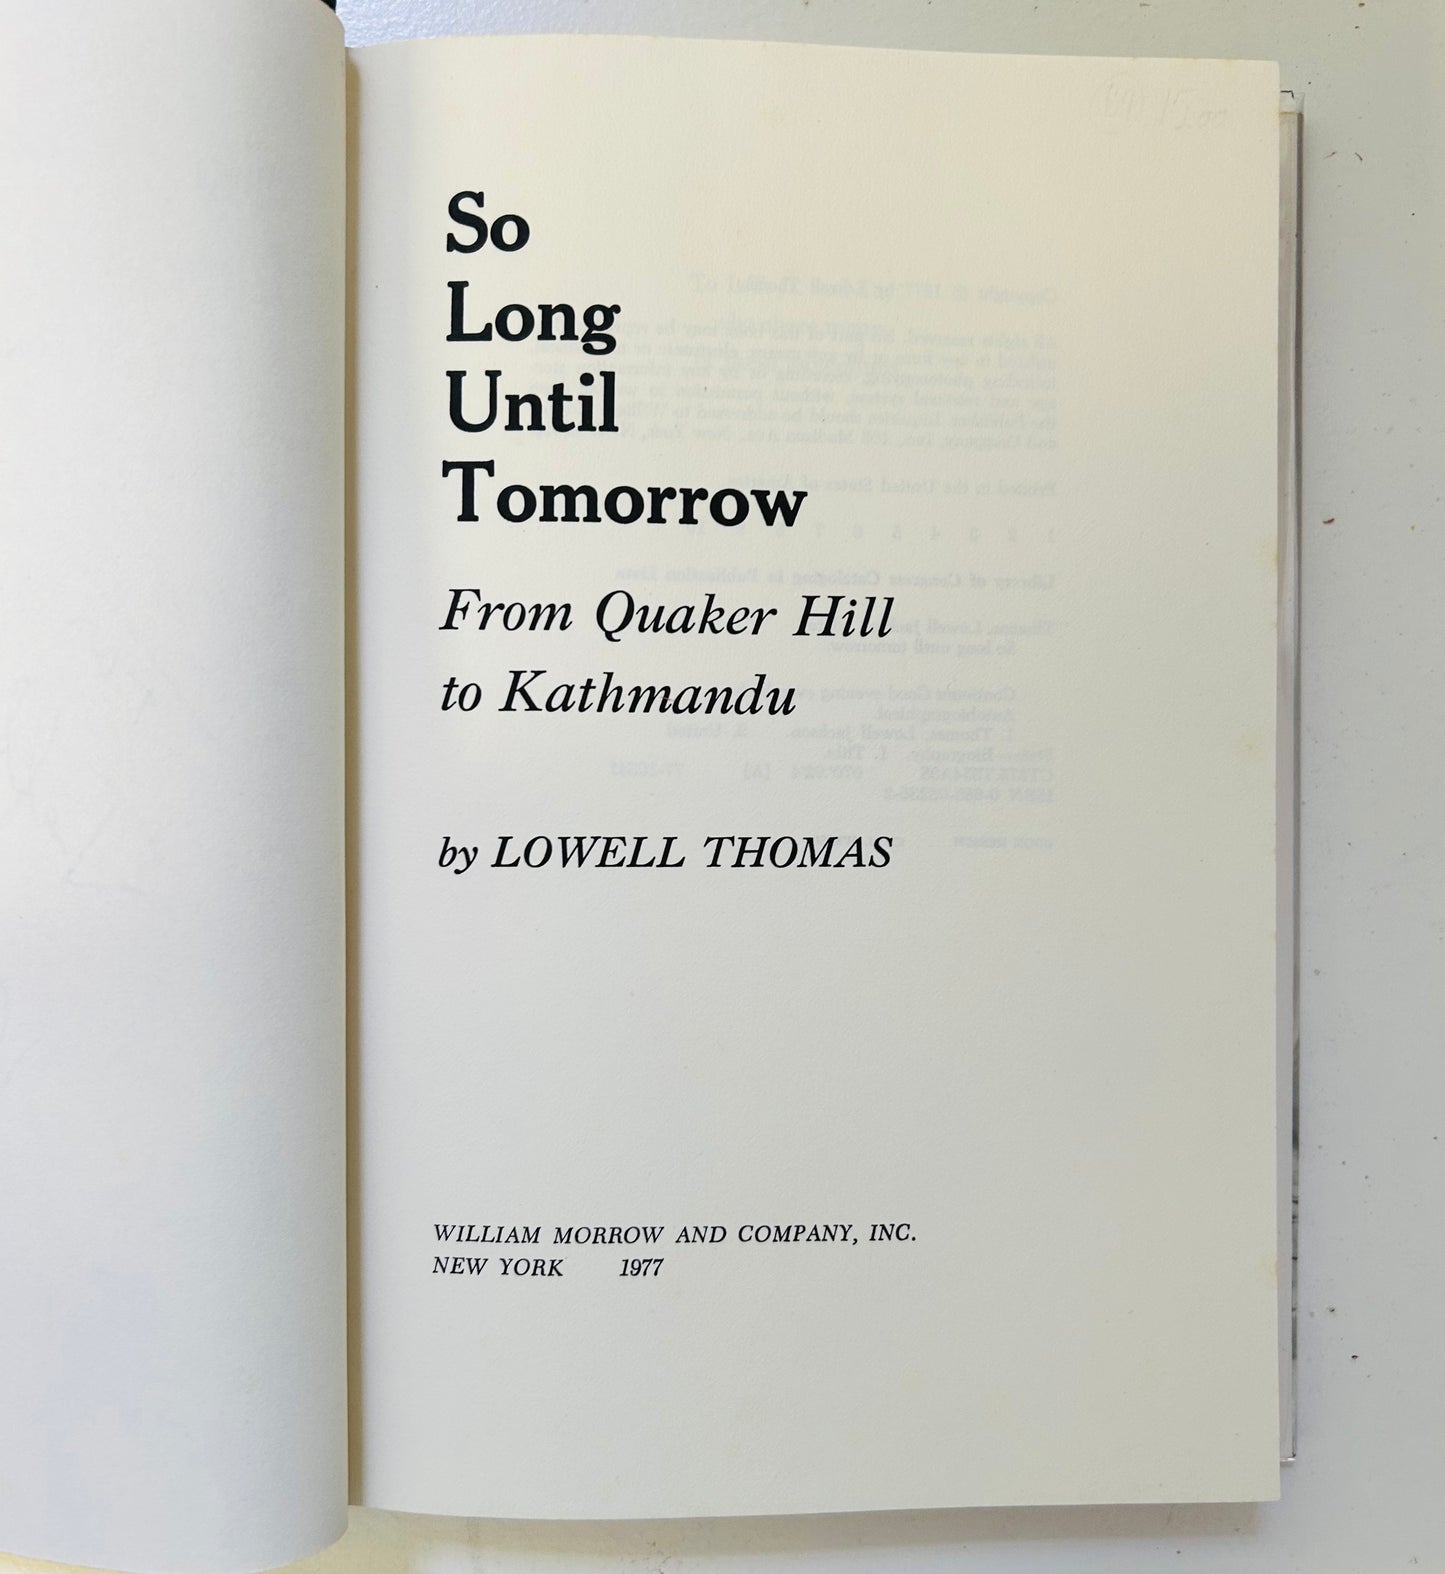 So Long Until Tomorrow (signed copy)